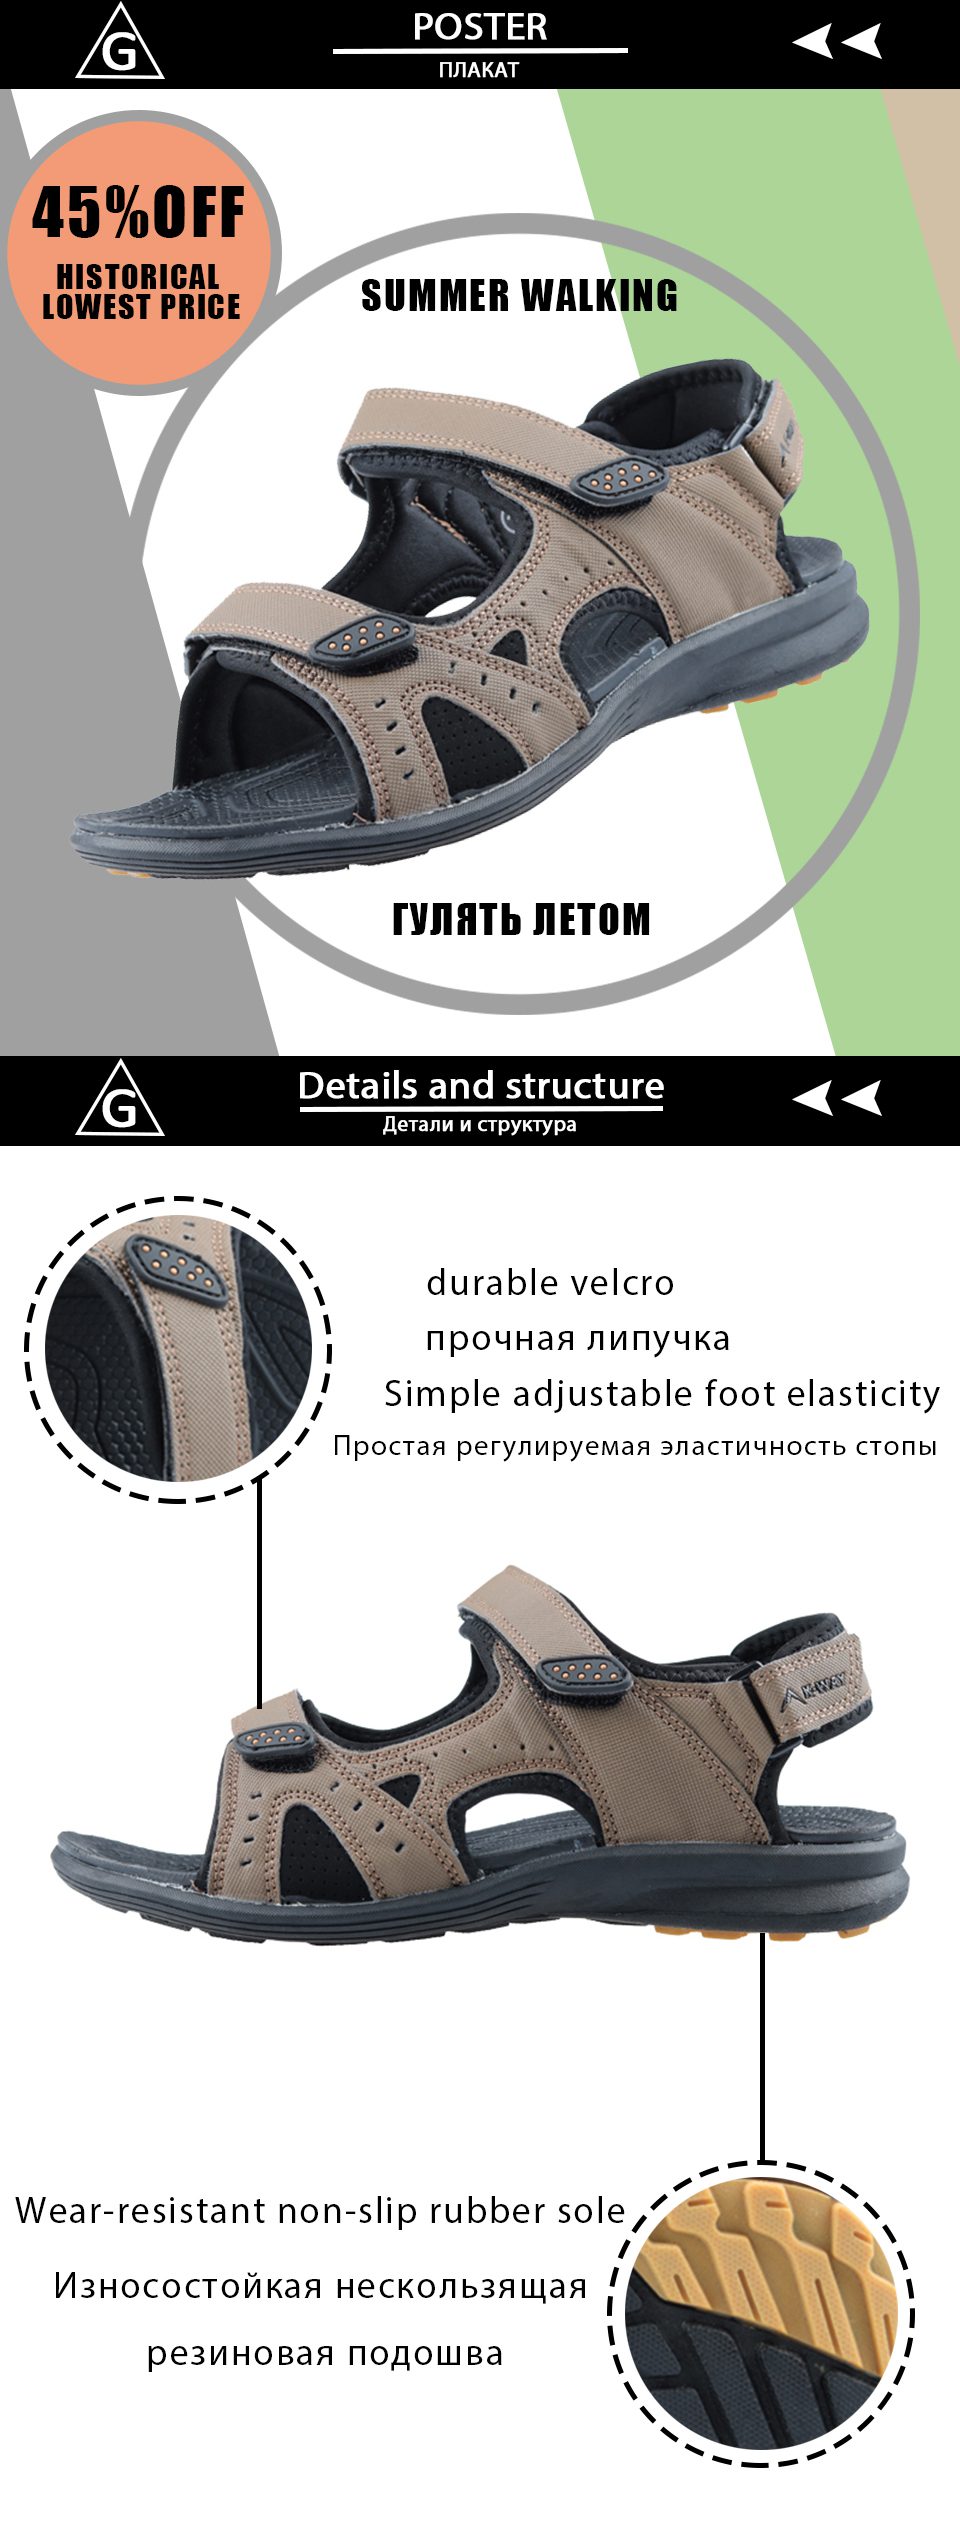 GRITION Men Sandals Outdoor Beach Summer Slippers Male Shoes Flat Lightweight Casual Sandals Breathable 2020 Comfort Fashion New